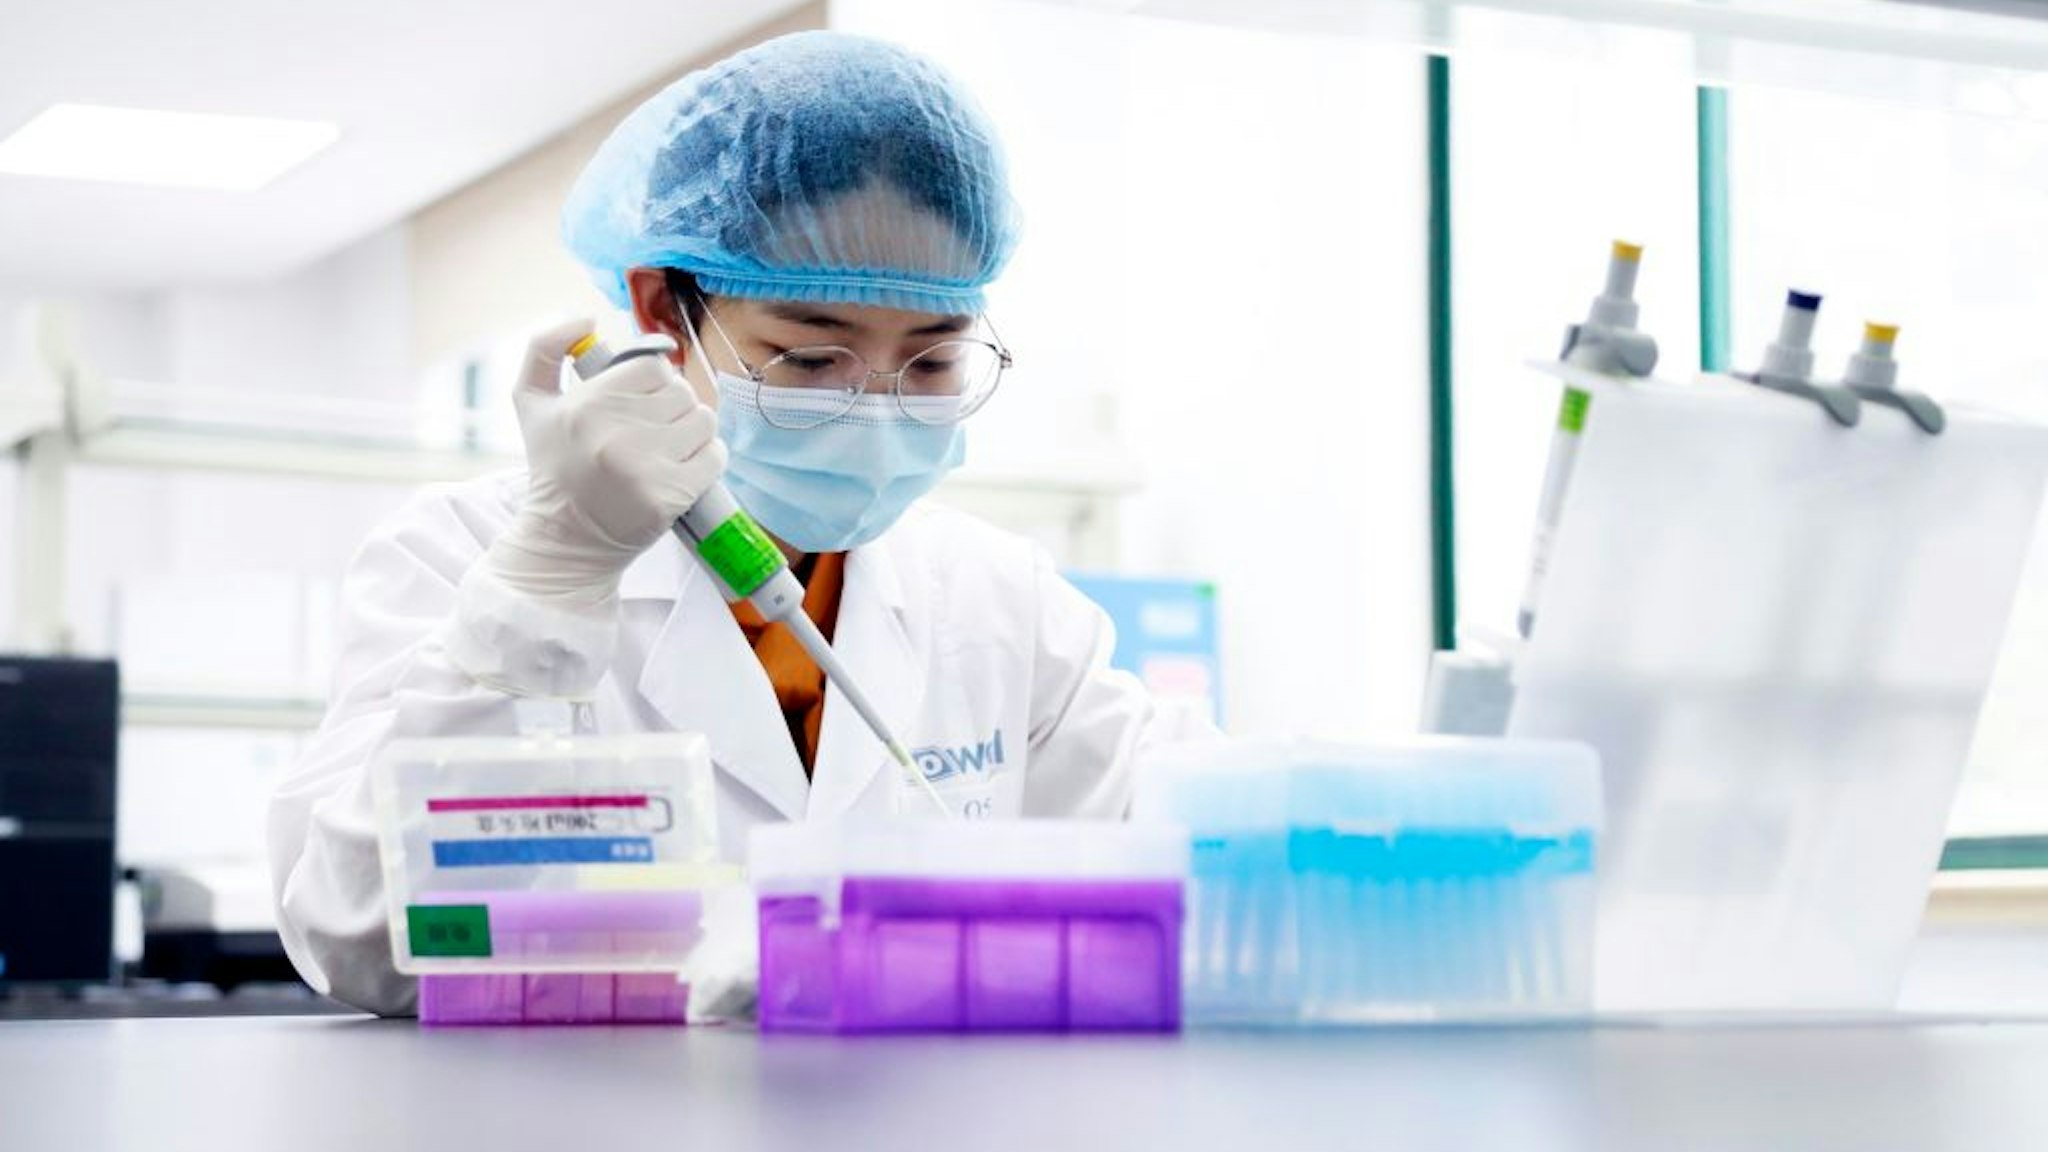 A researcher tests an antibody at Dowell Clinical Laboratory on March 1, 2020 in Shanghai, China.